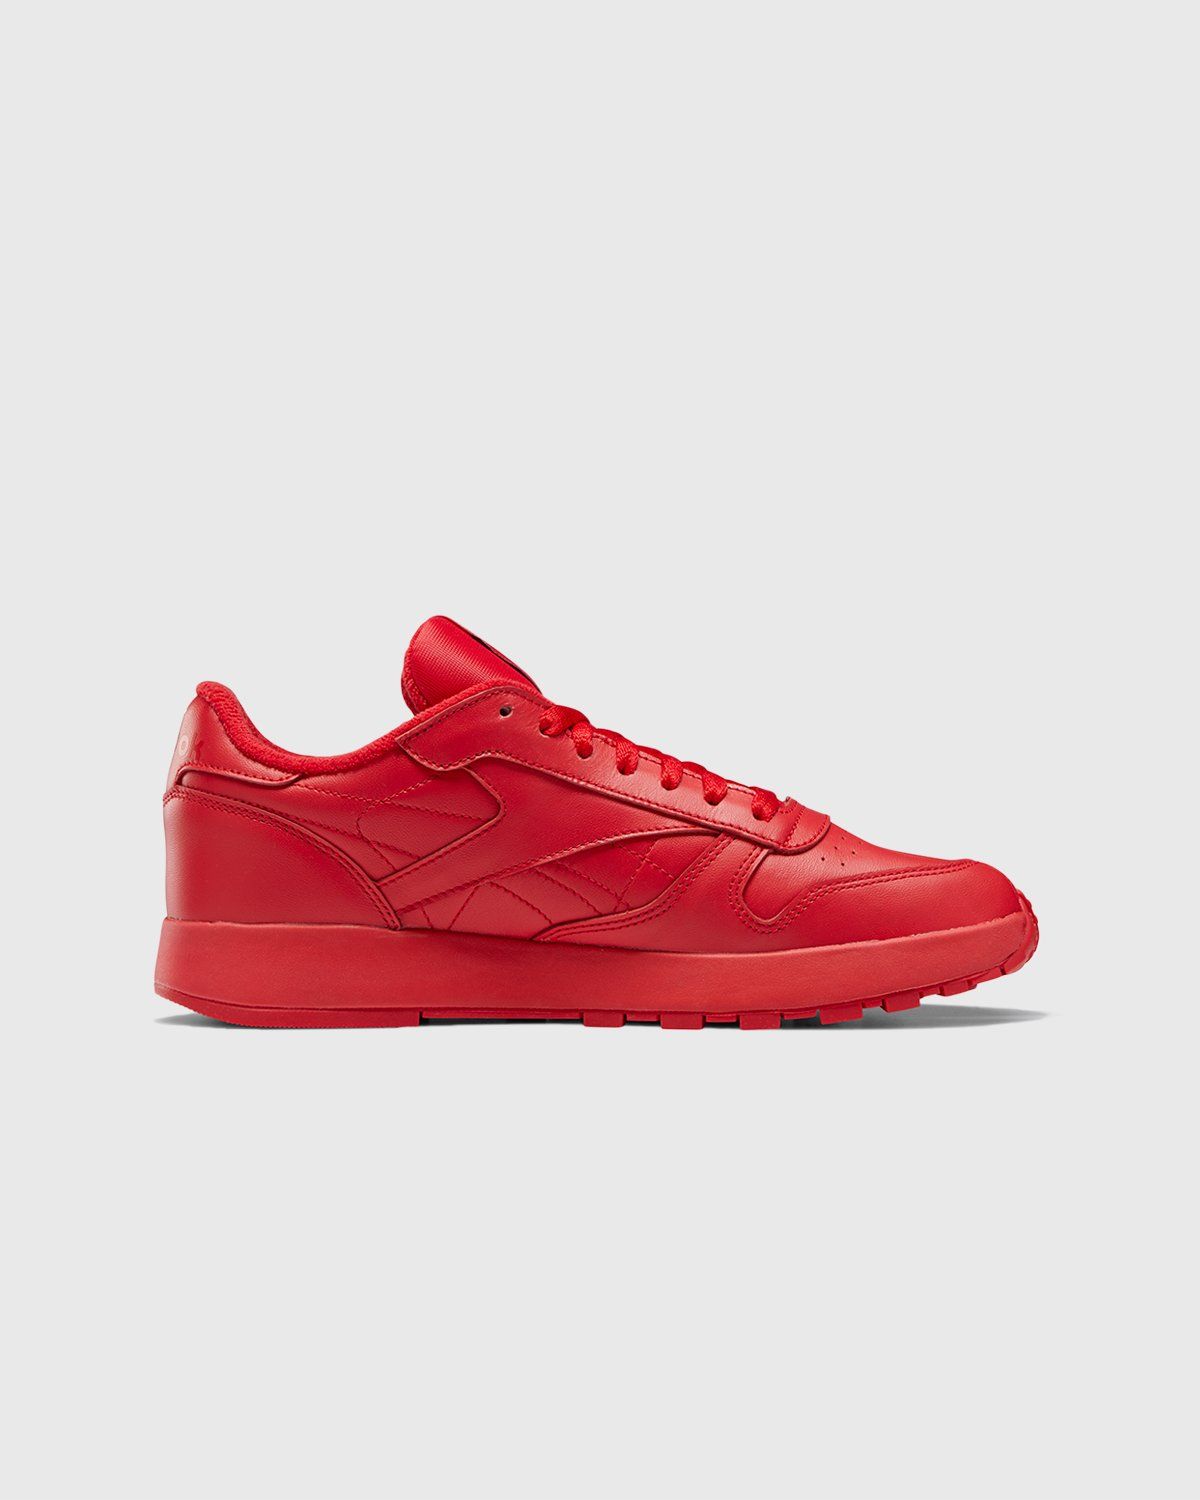 Maison Margiela x Reebok – Classic Leather Tabi Red - Low Top Sneakers - Red - Image 5